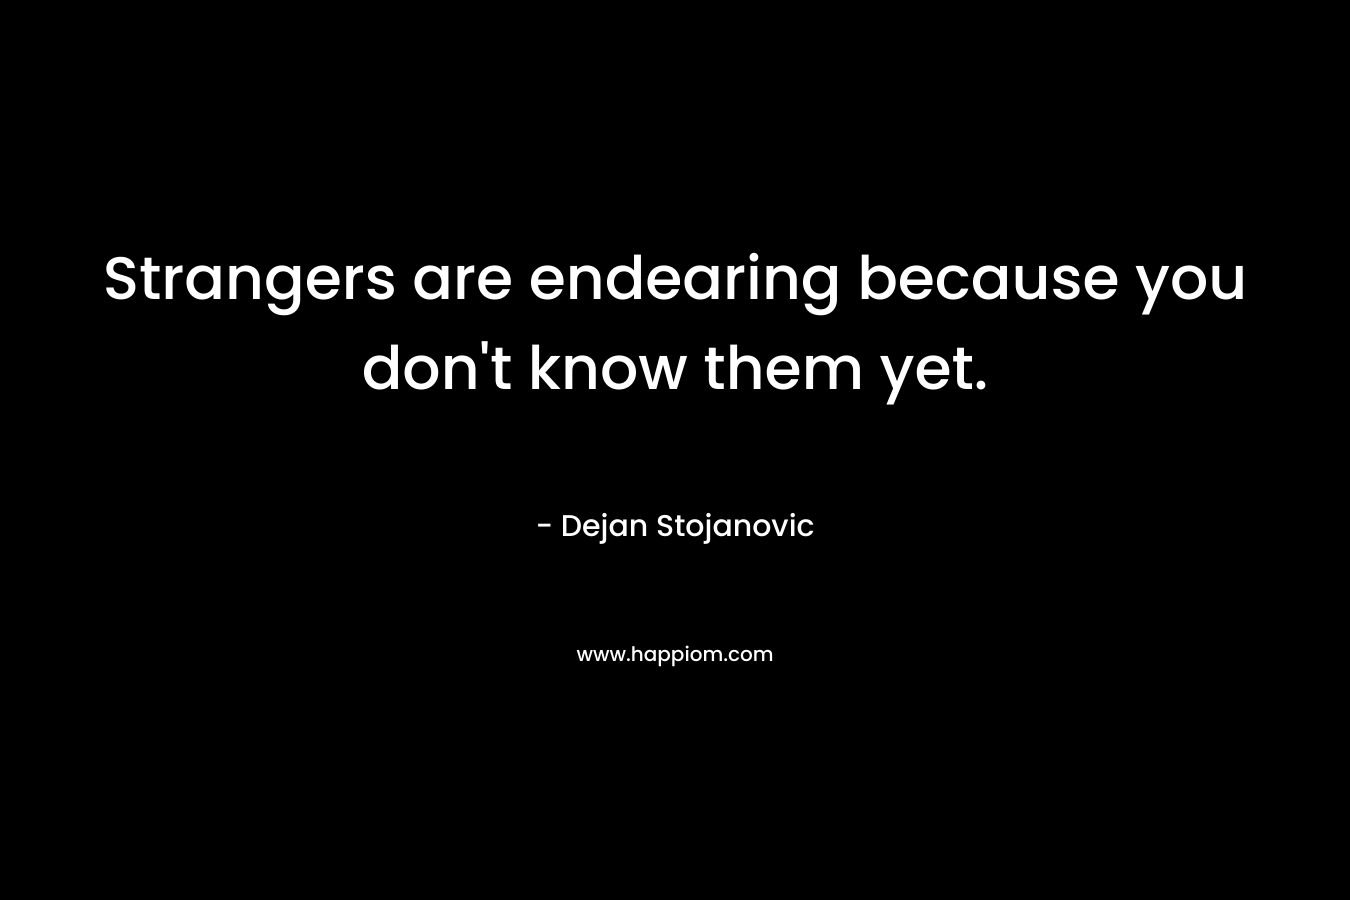 Strangers are endearing because you don't know them yet.